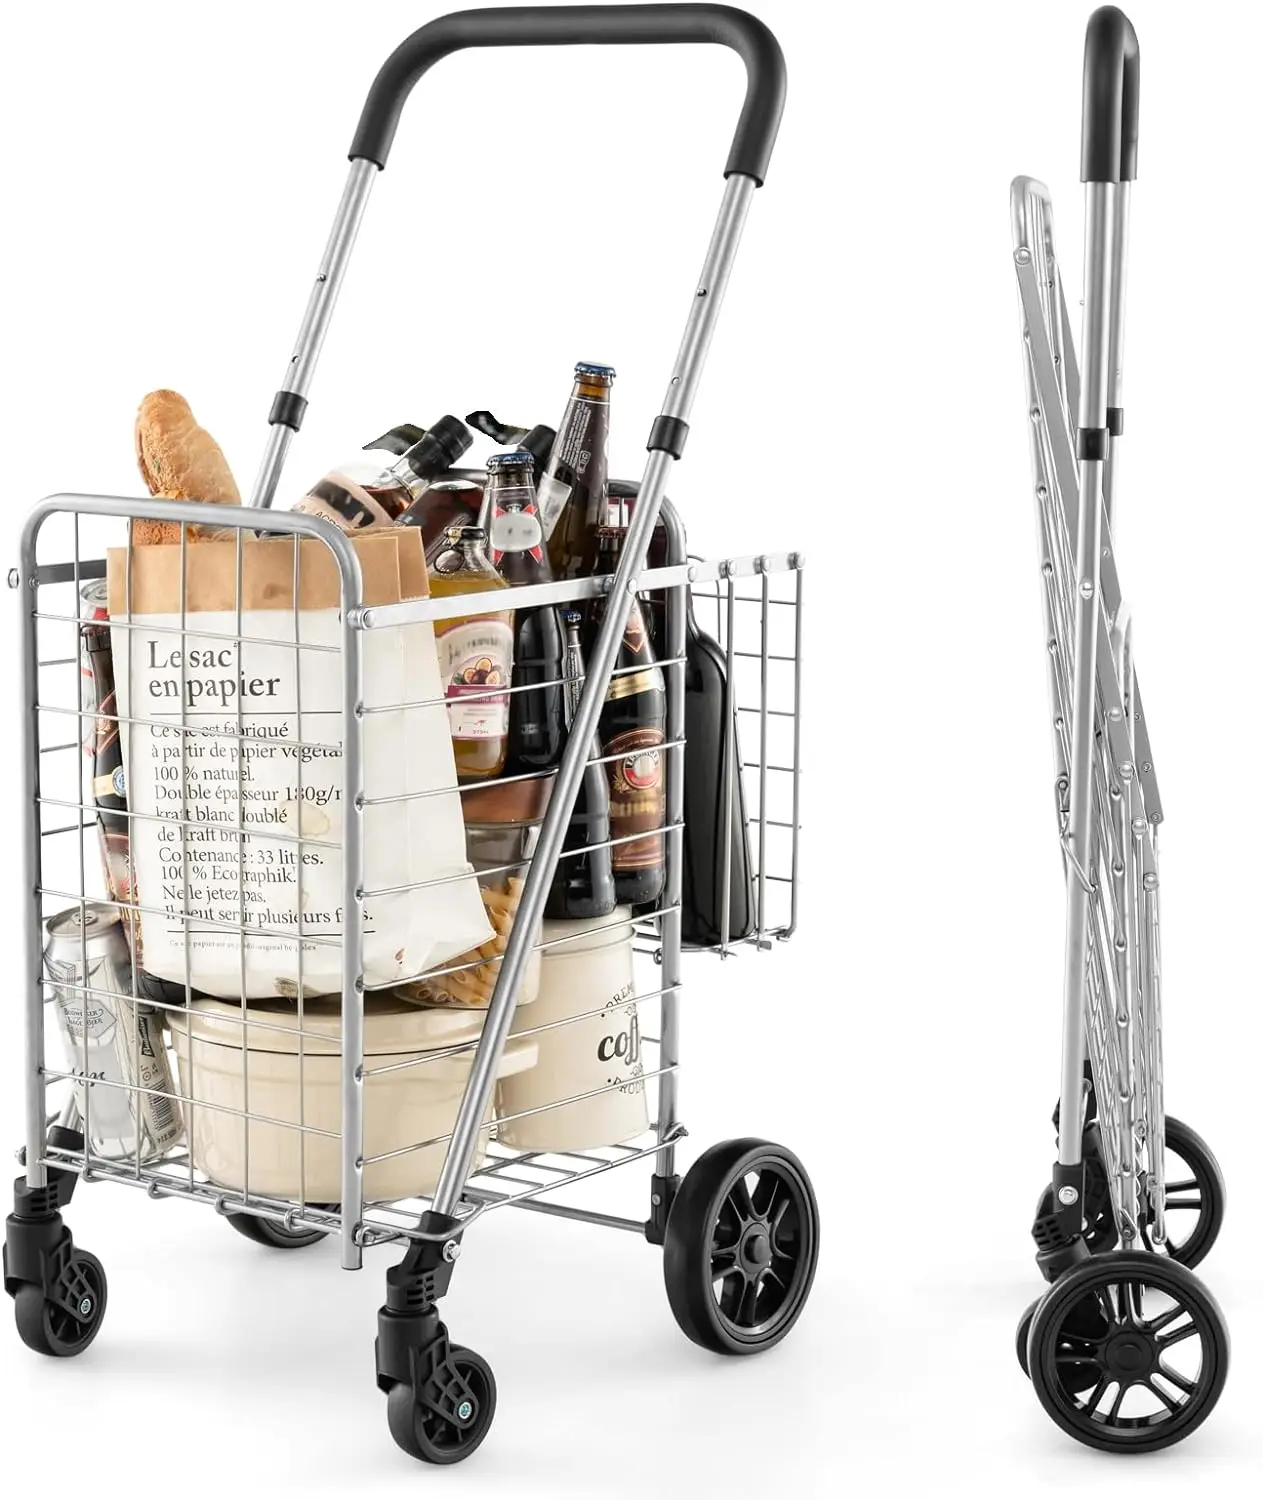 

Folding Shopping Utility Cart, Double Basket and 360° Swivel Wheels, Adjustable Handle, Small Cart Perfect for Grocery Laundry